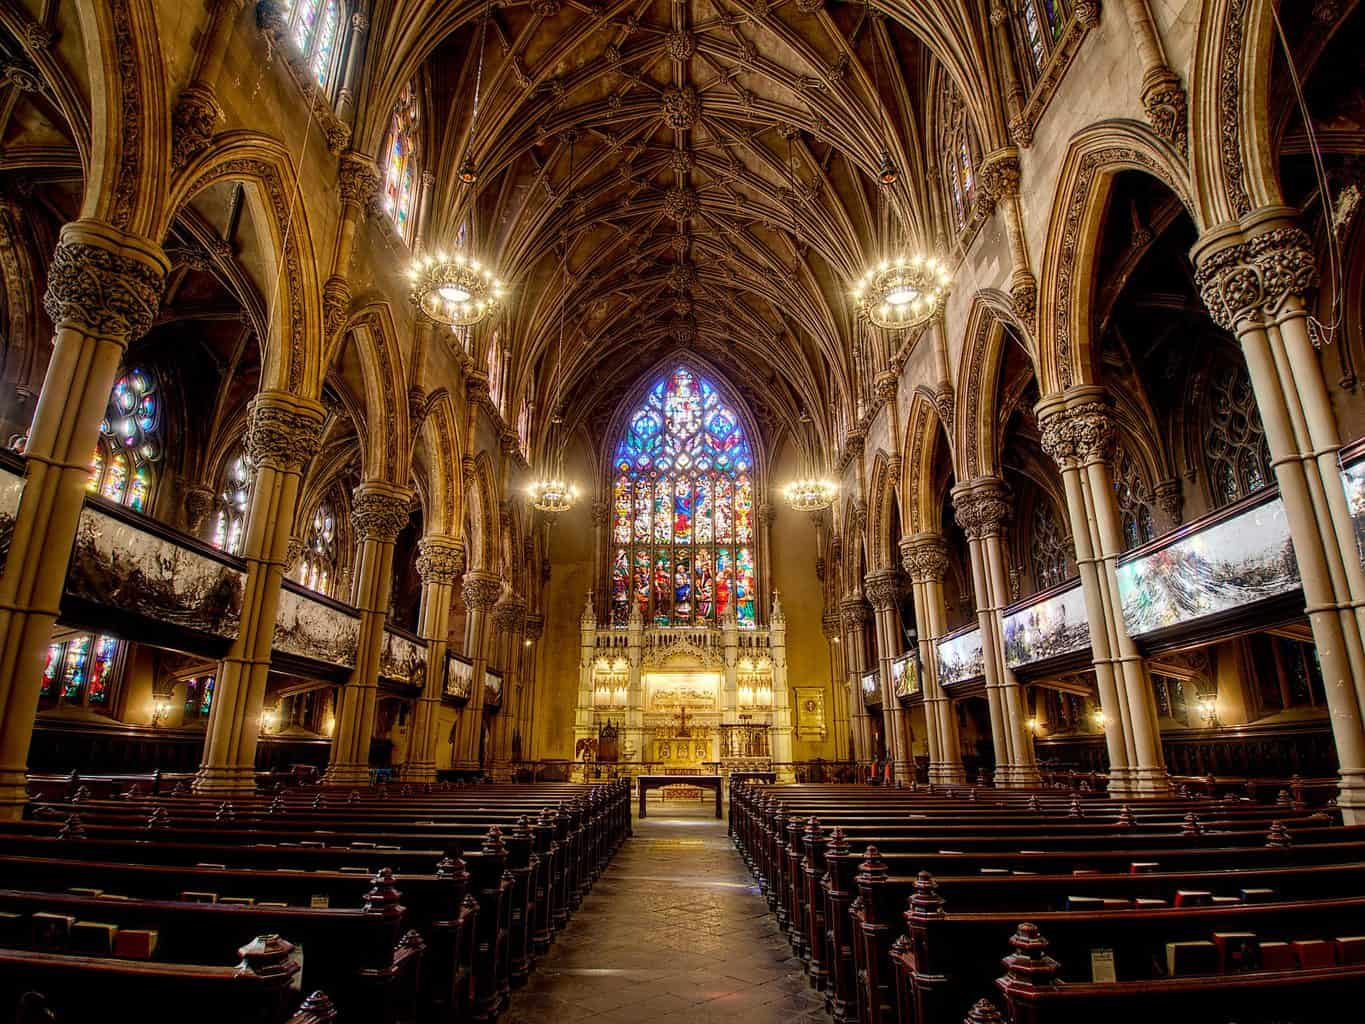 The impressive Gothic Revival style architecture and historic staimed glass windows of St. Ann and the Holy Trinity Church in Brooklyn